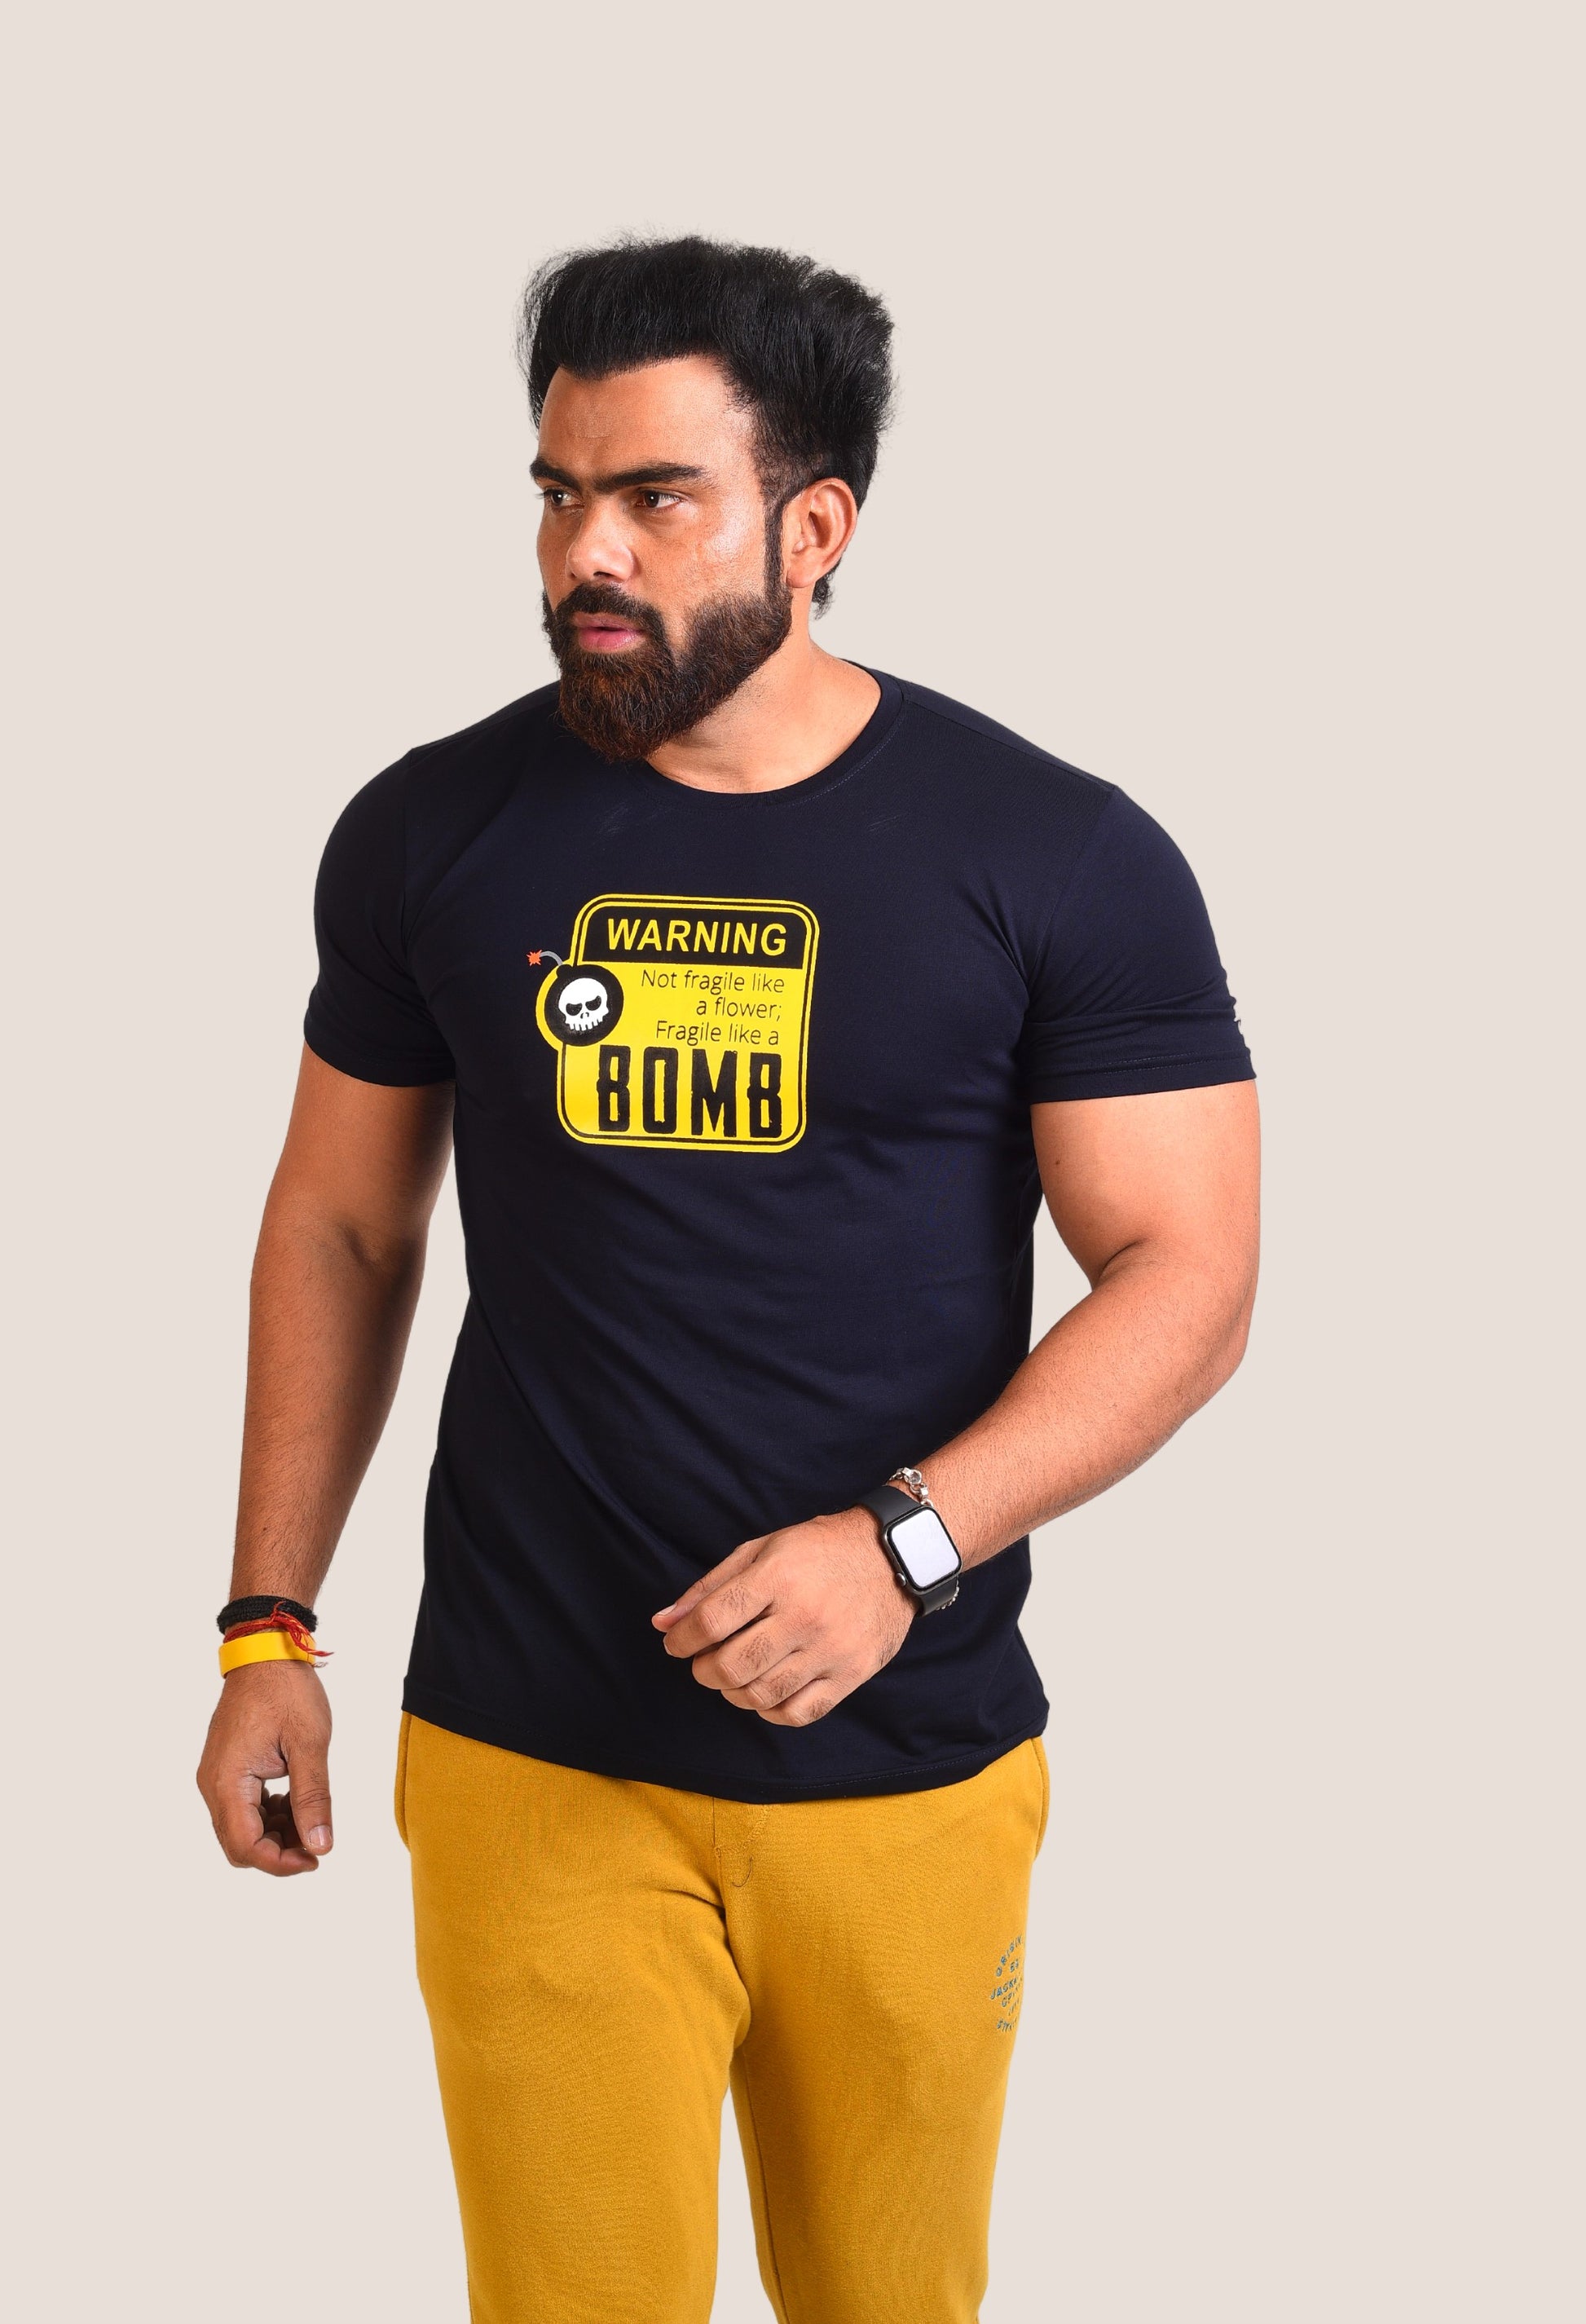 Gym T Shirt - Not Fragile Like A Flower Fragile Like A BOMB - Men T-Shirt with premium cotton Lycra. The Sports T Shirt by Strong Soul